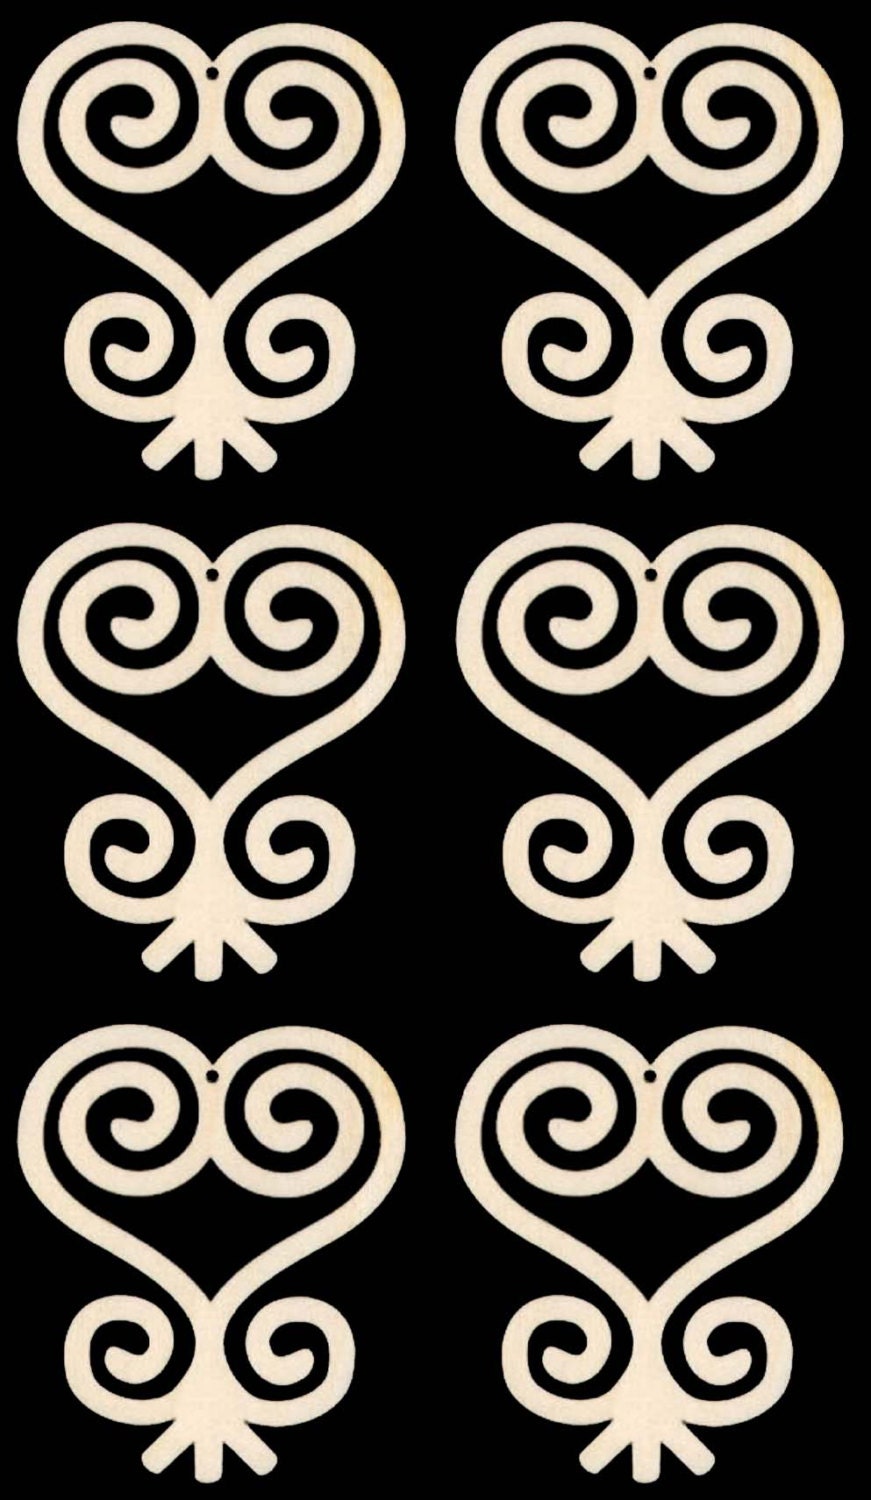 Sankofa African Adinkra Symbol of Learn from the Past Natural